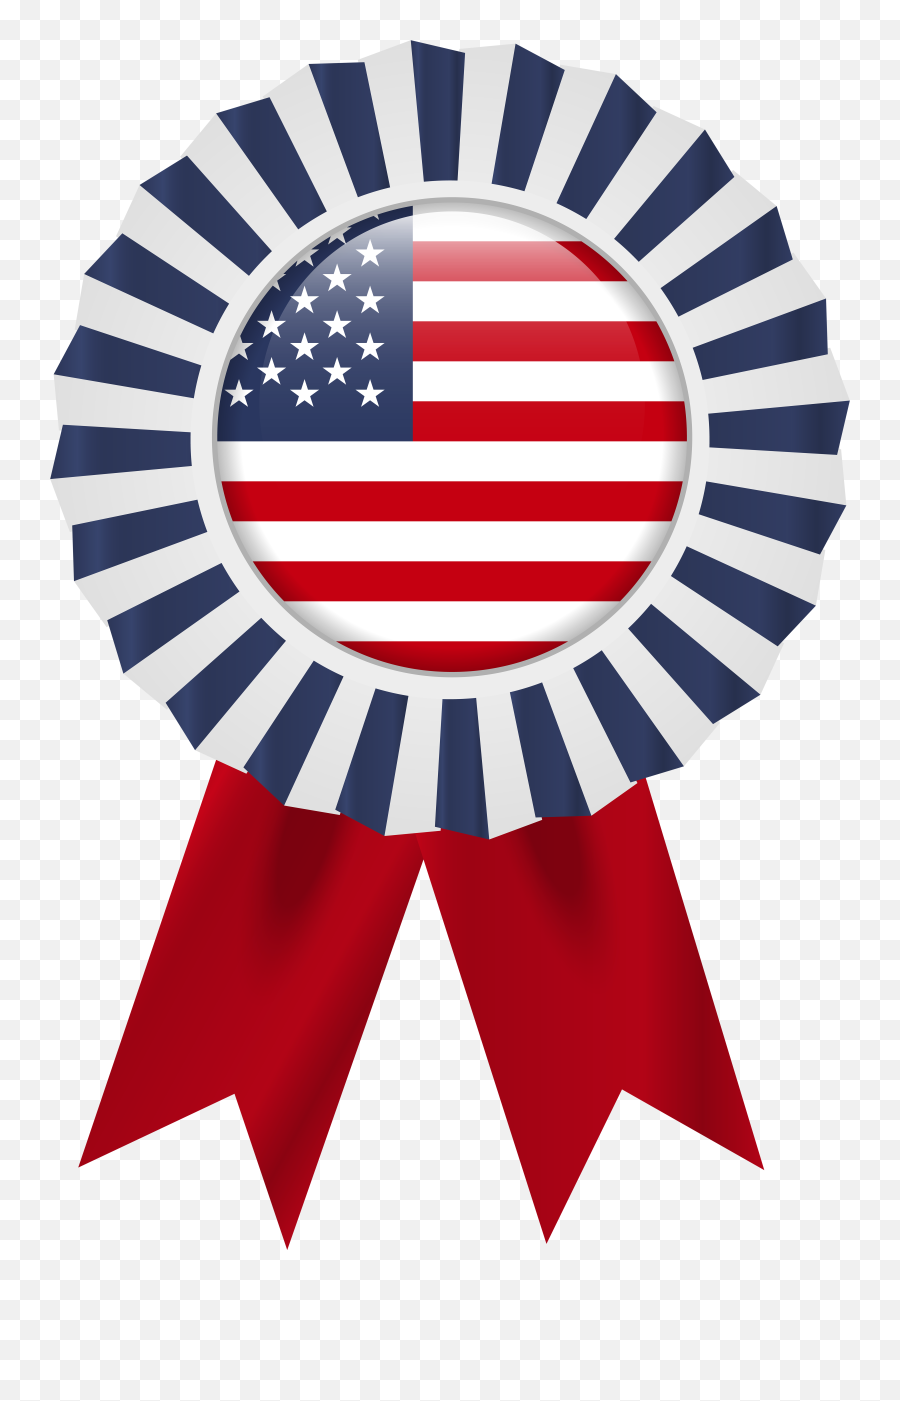 Download Hd Usa Flag Rosette Png Clip Art Image Gallery - Hobby Lobby Paper Fans,American Flag Clip Art Png